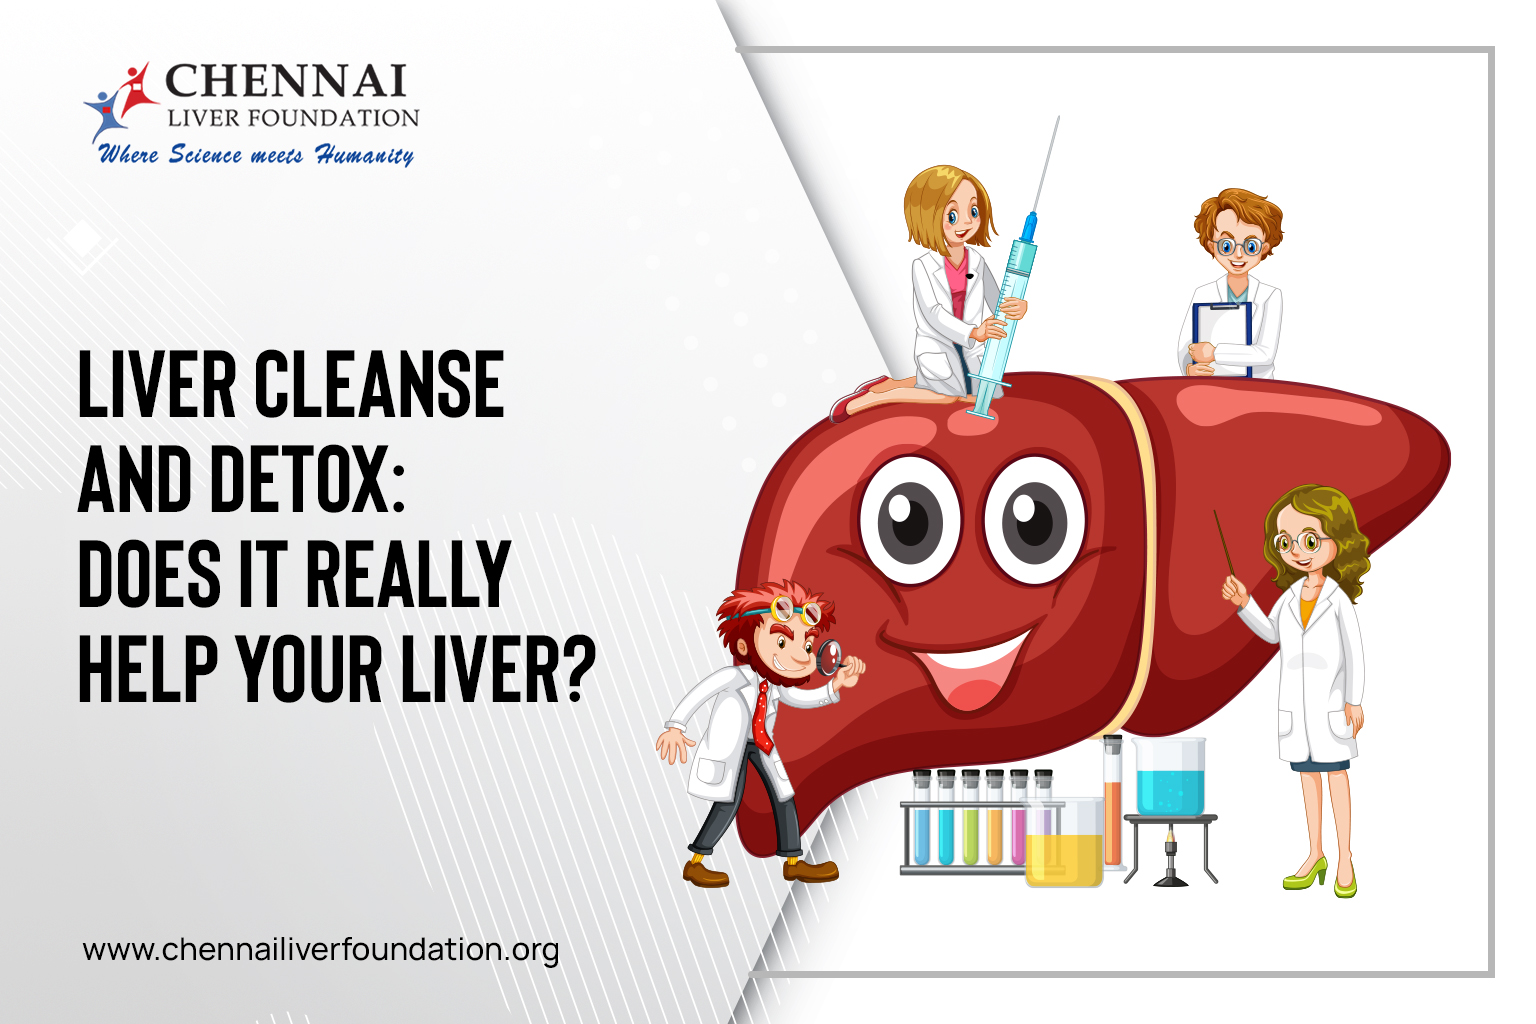 Can a detox or cleanse help your liver?